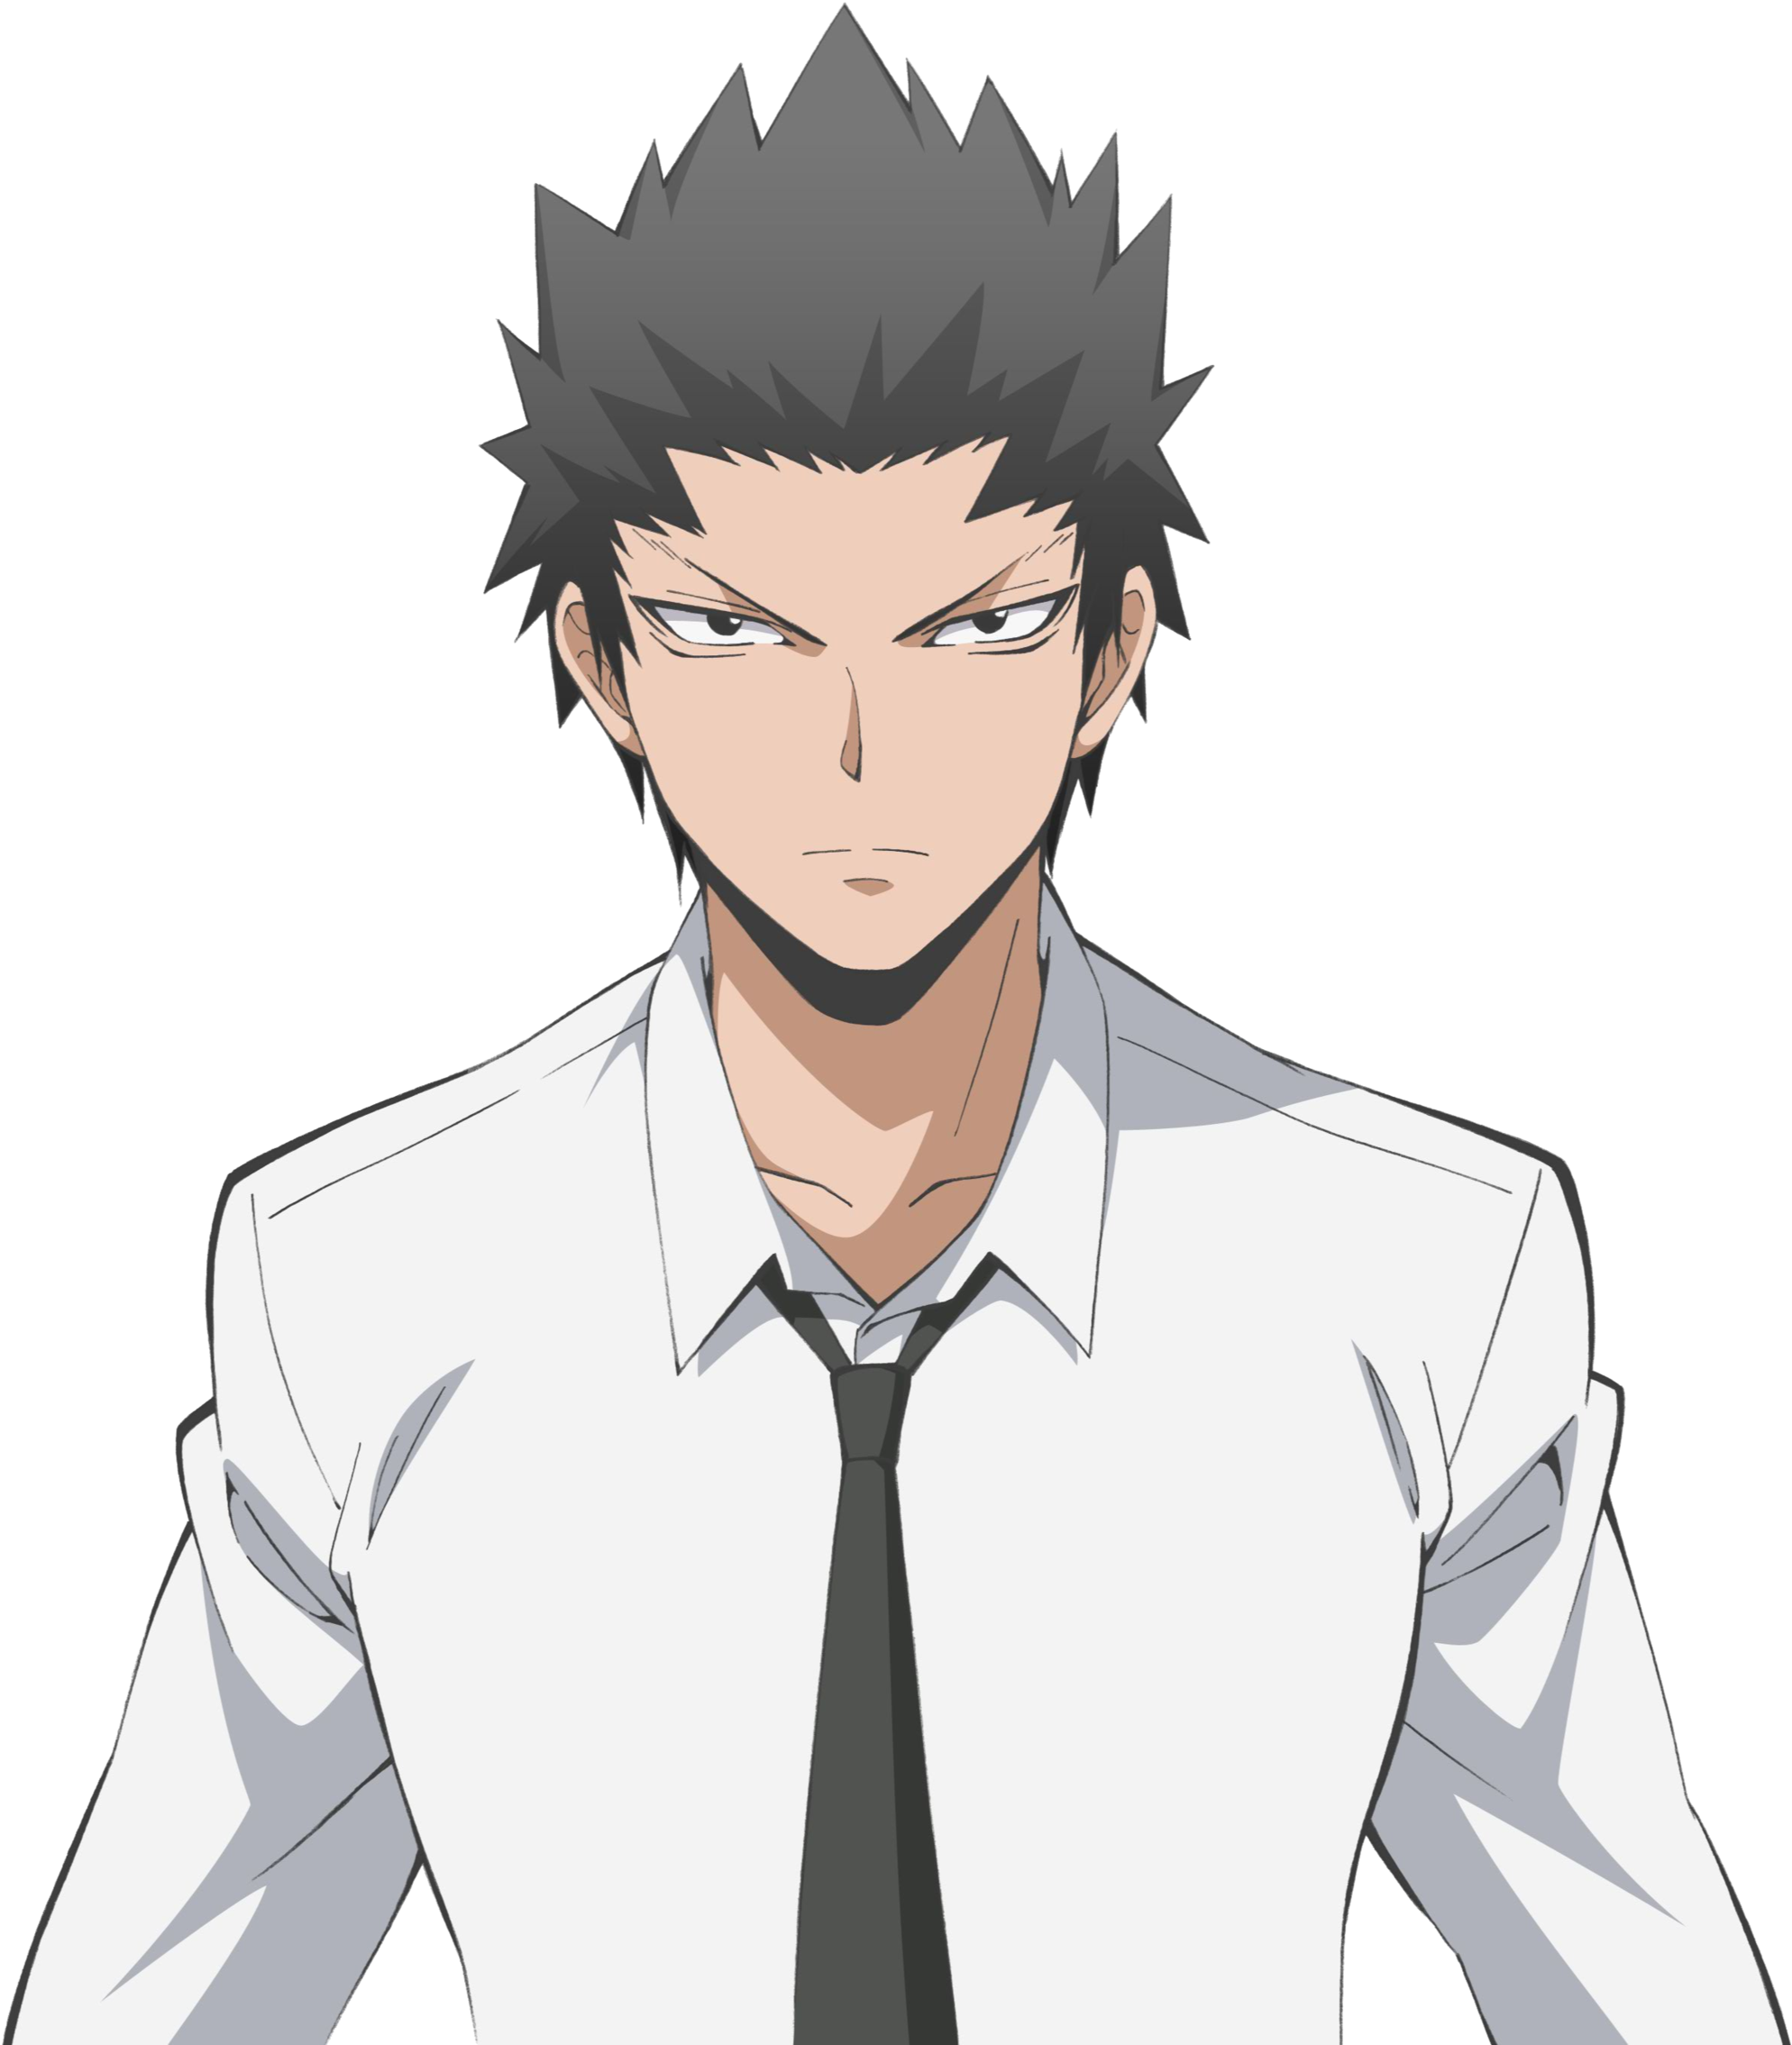 Download PNG image - Assassination Classroom PNG Image 